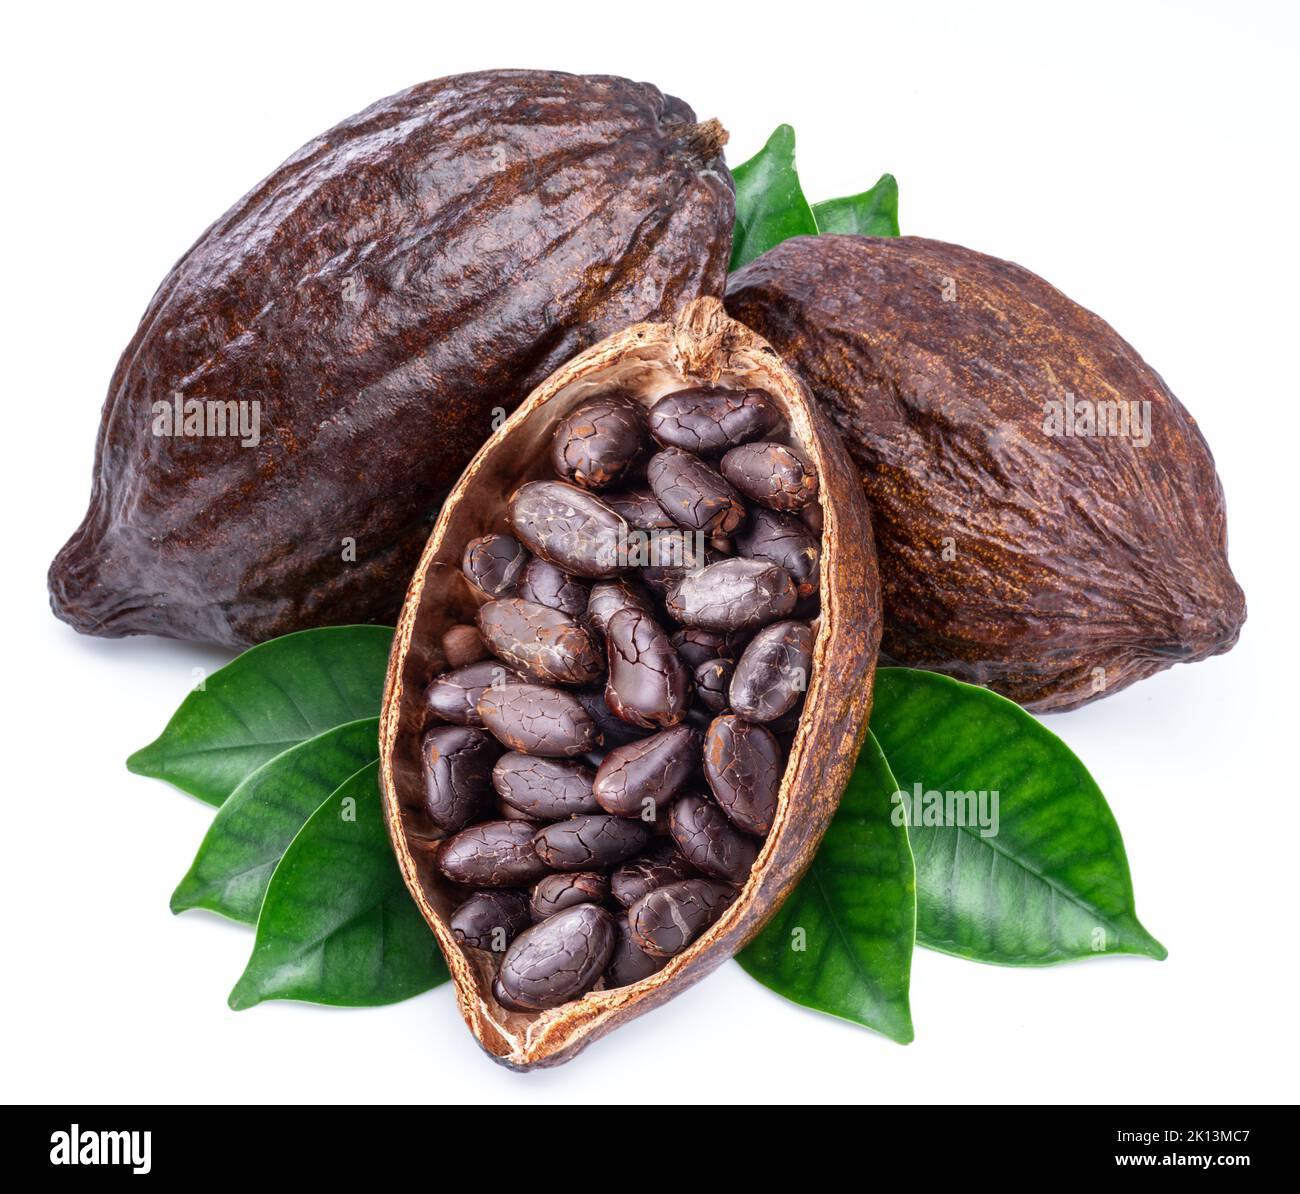 Cocoa pods with cocoa leaves and beans isolated on a white background. Stock Photo